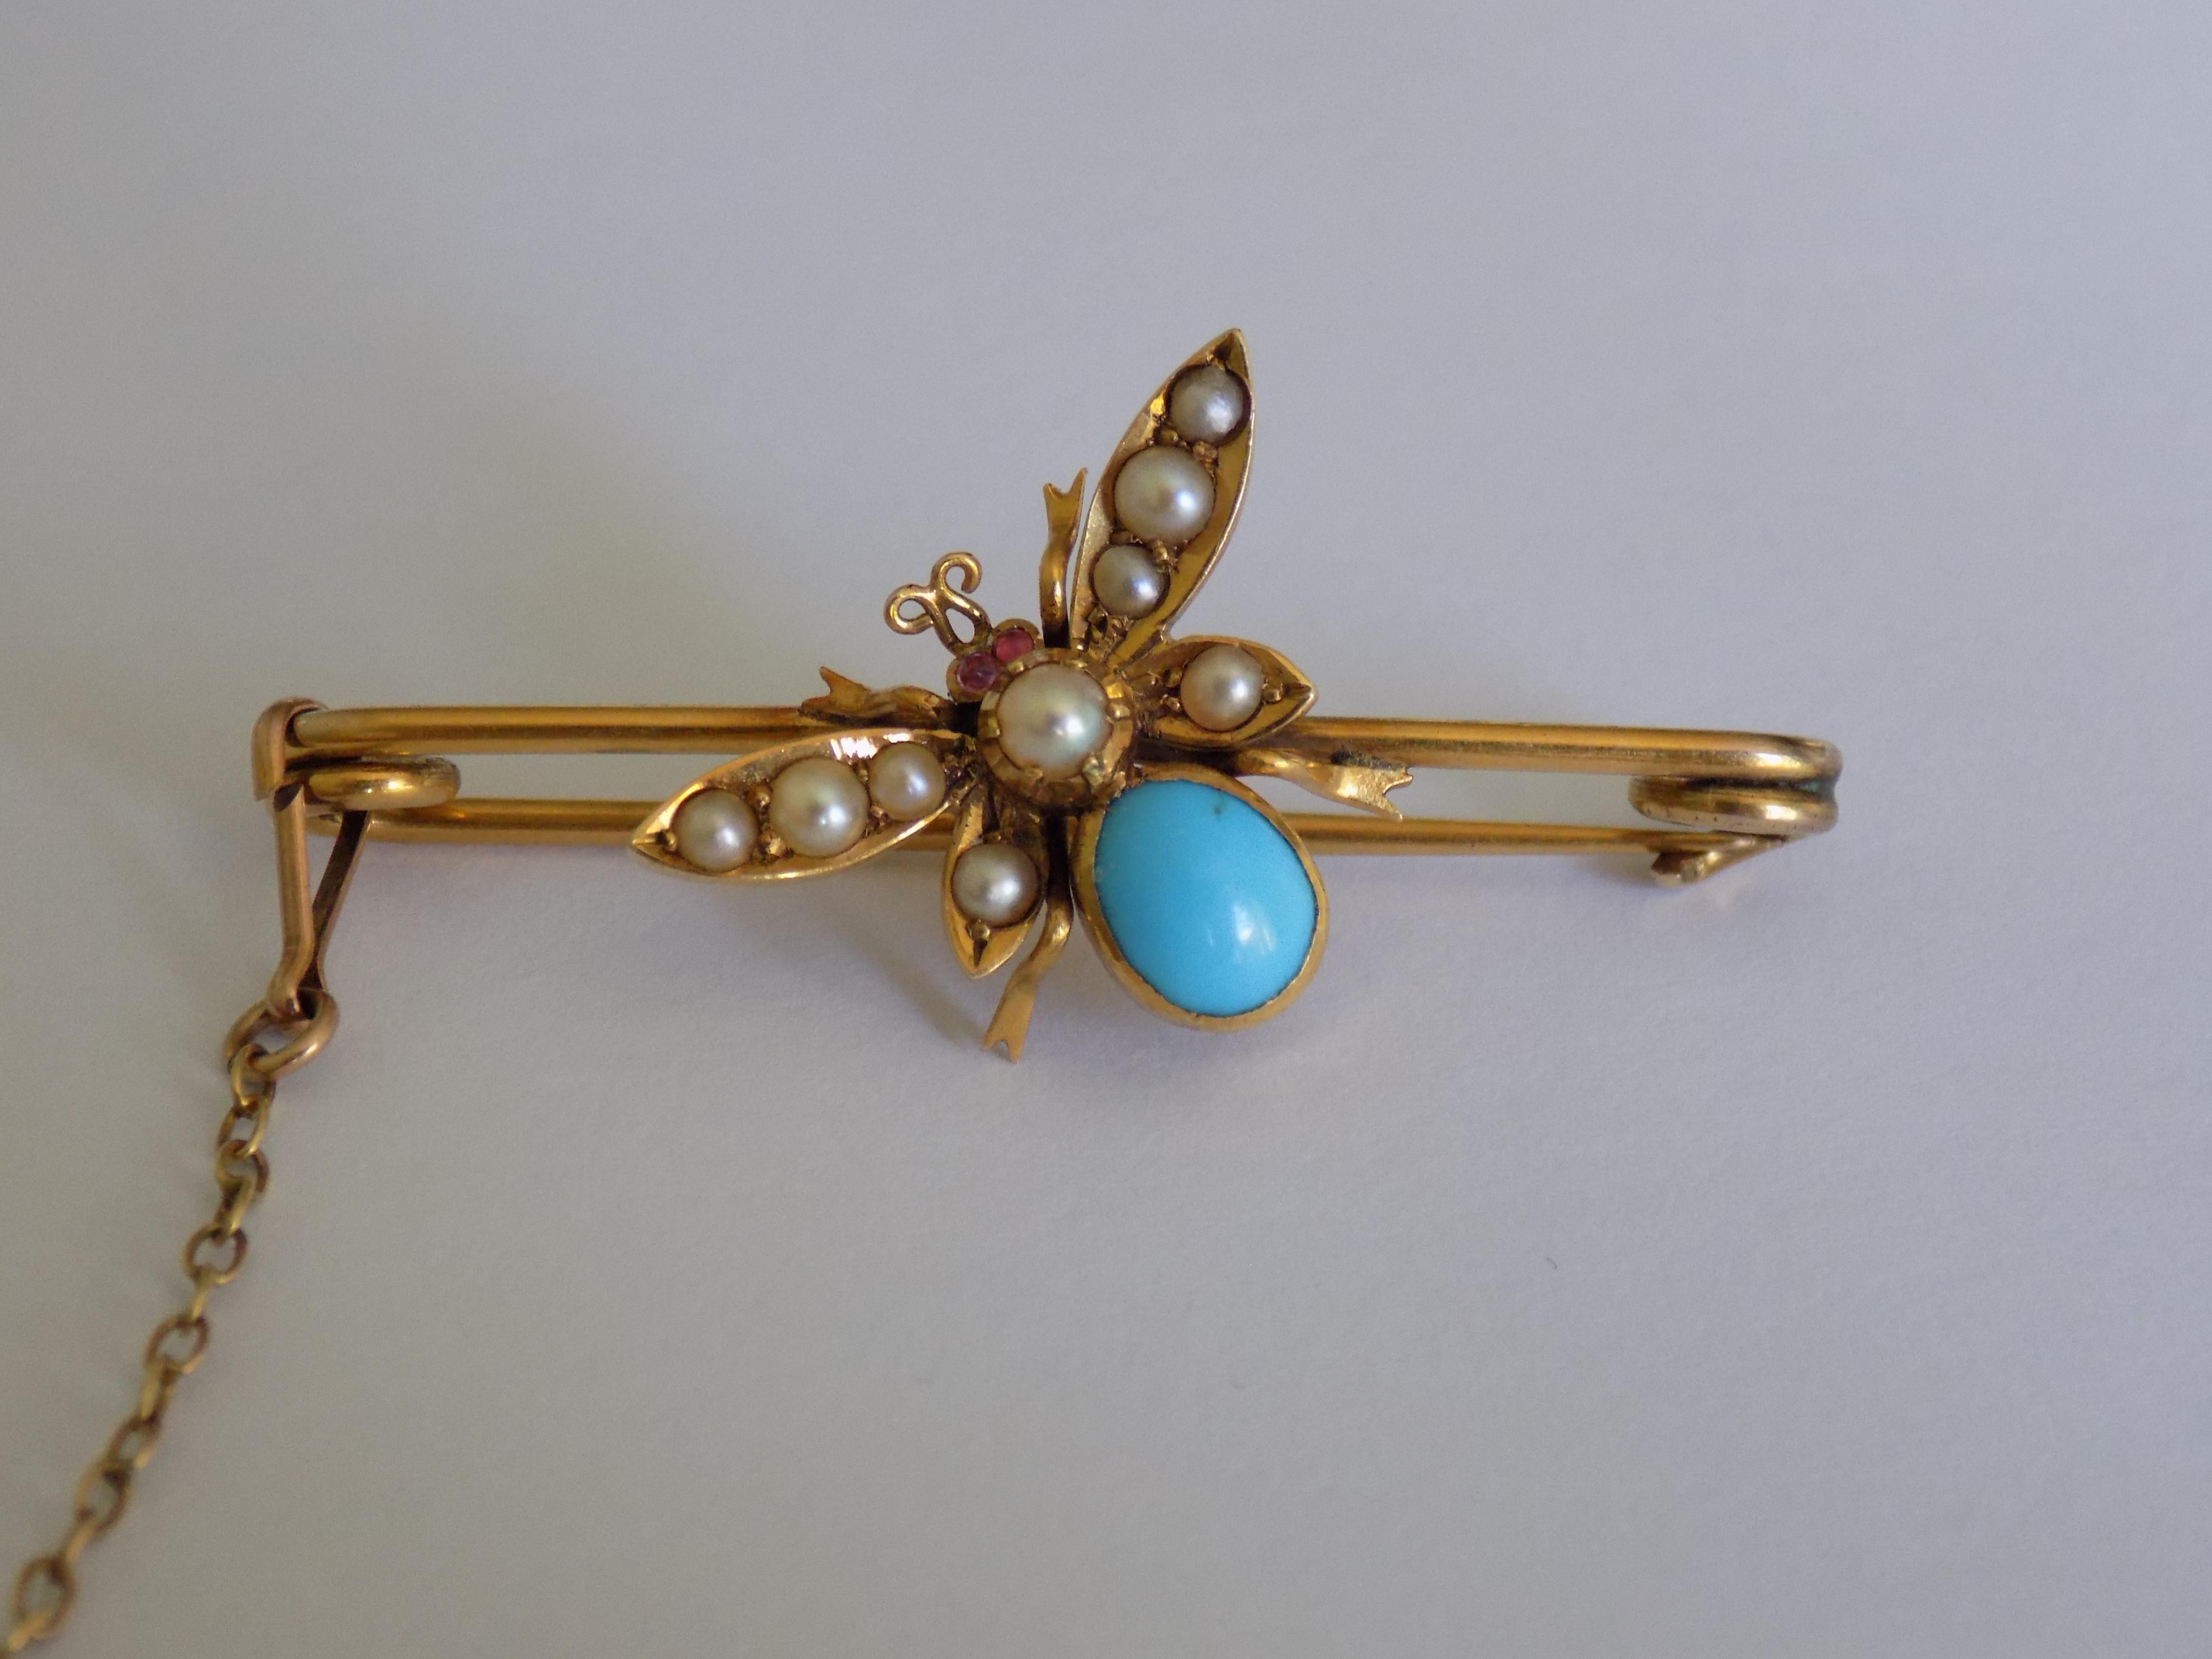 A Beautiful Antique Edwardian Yellow Gold, Turquoise and Pearl Butterfly bar brooch. English origin.
Height 18mm, Width 37mm.
Weight 3.5gr.
Unmarked.
The brooch completed with safety chain.